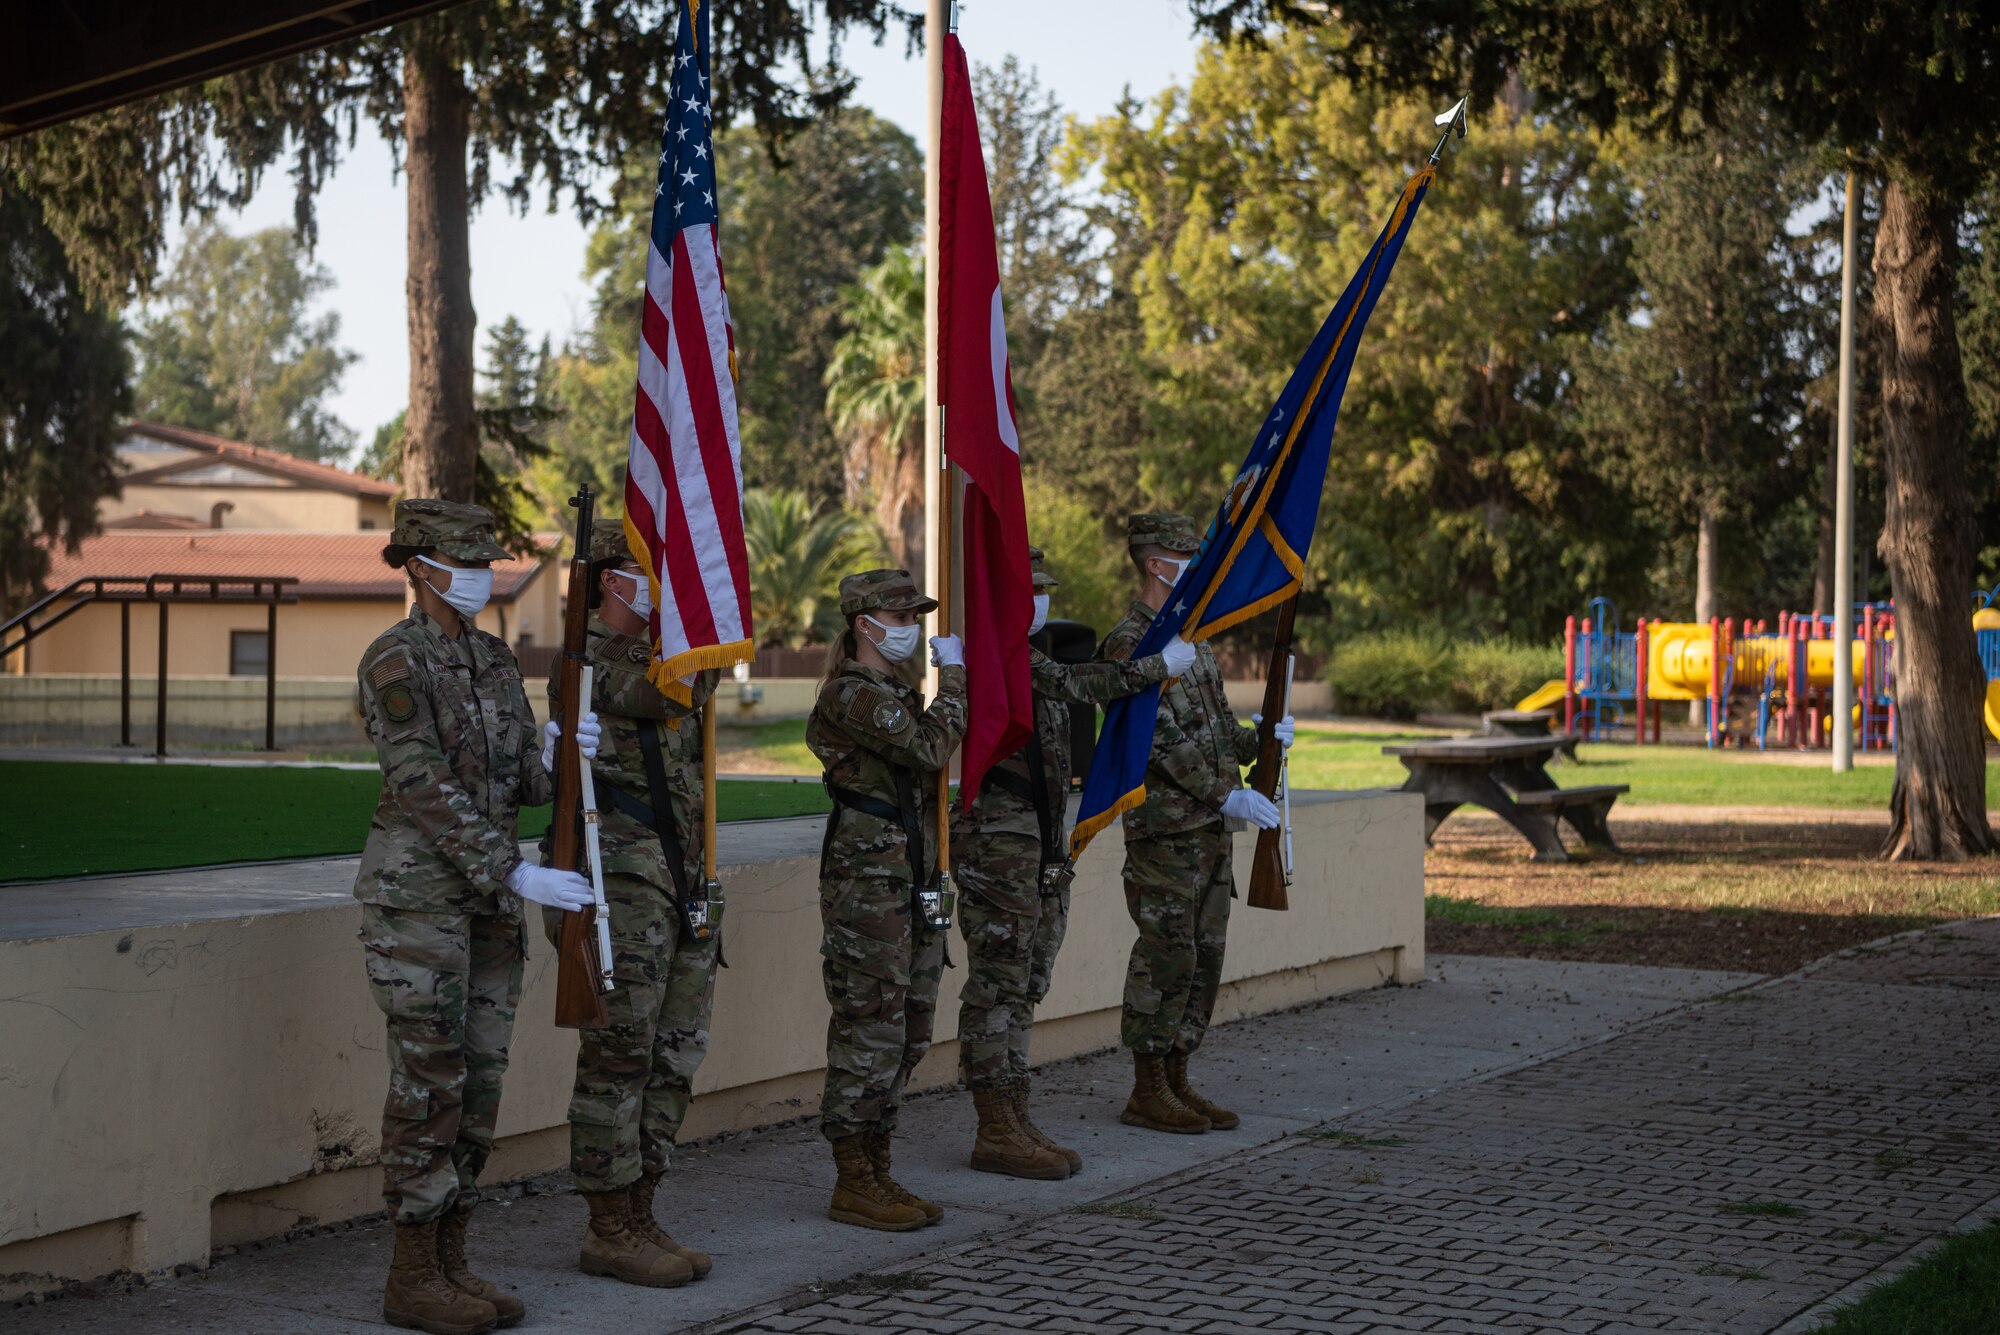 Honor guardsmen presenting flags at ceremony